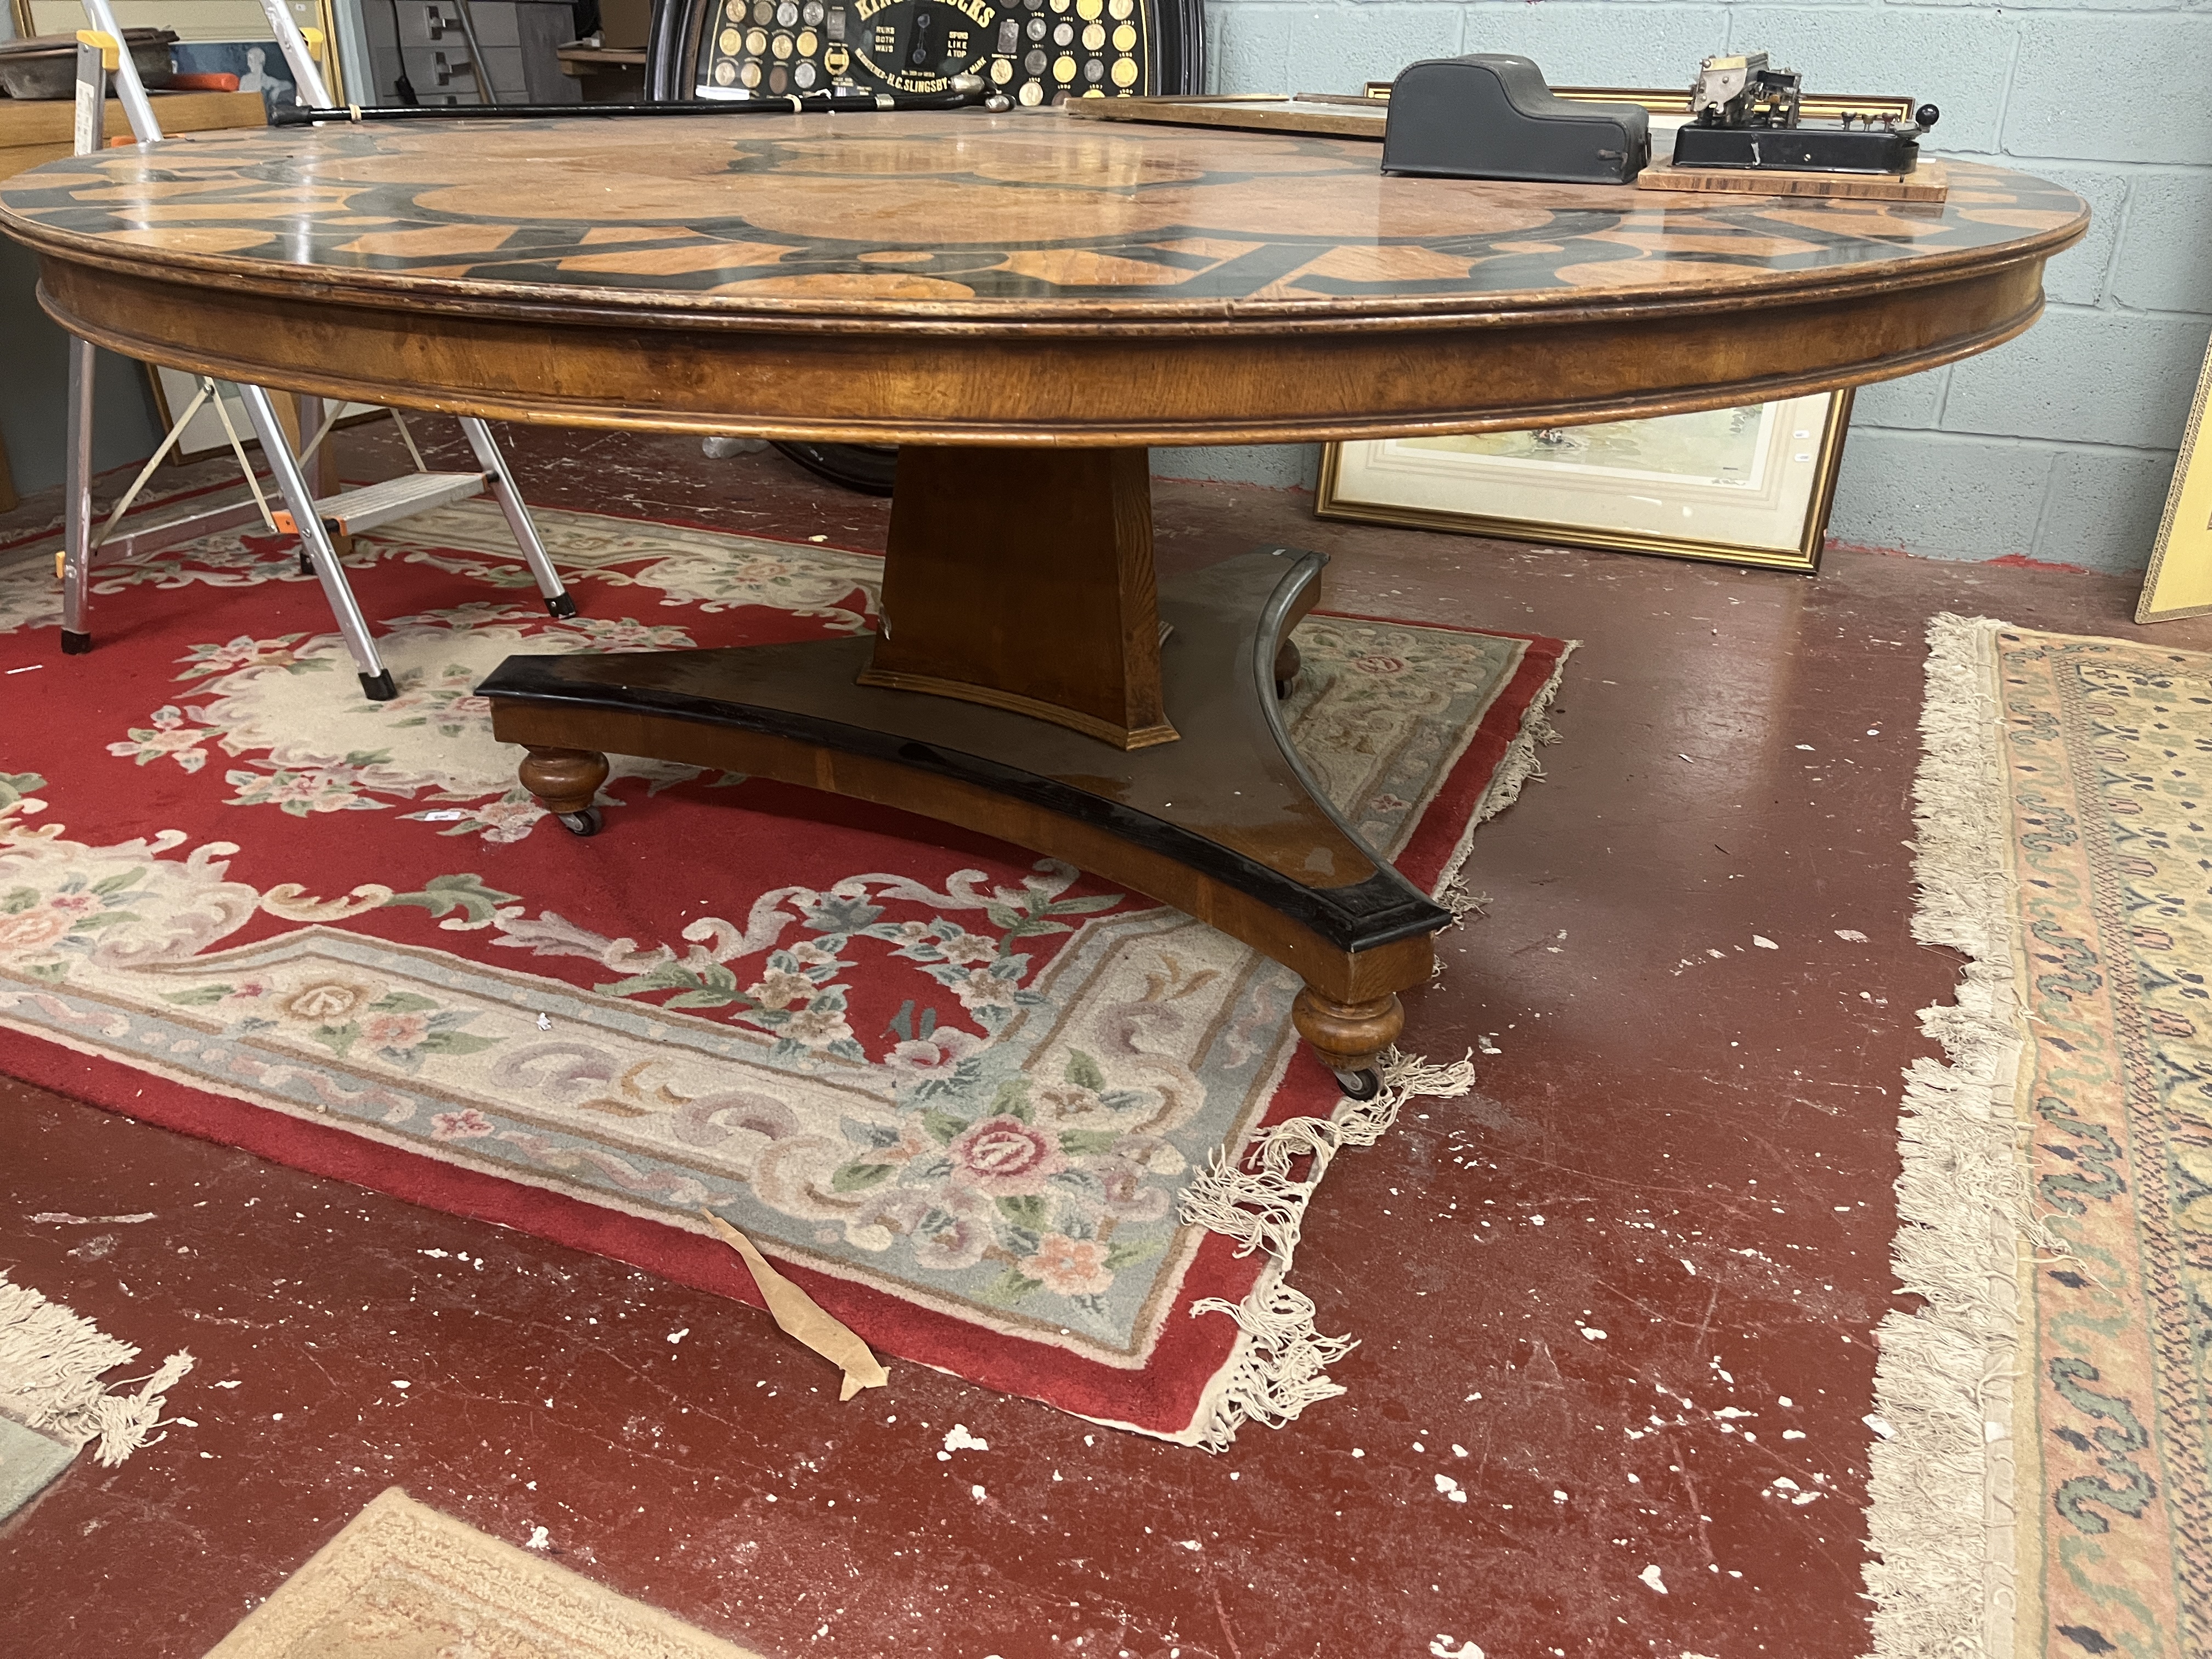 Large antique circular inlaid pedestal table - Approx size: Diameter 183cm, Height 76cm - Image 2 of 3